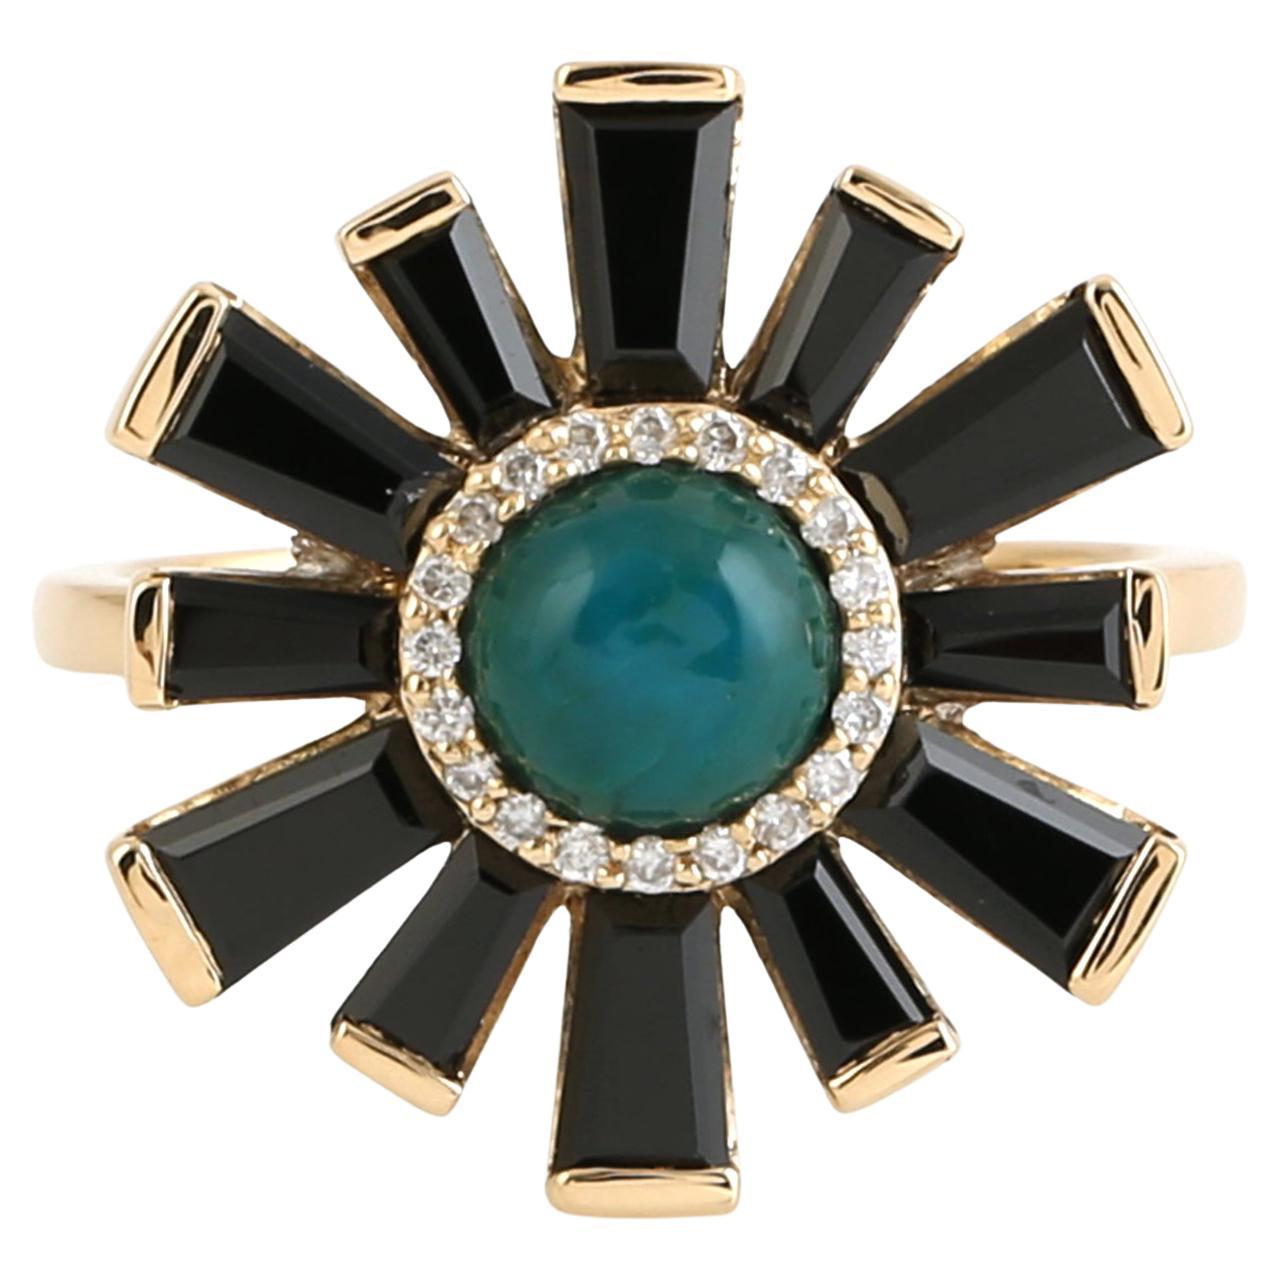 Baguette Shaped Spinel Ring With Round Chrysoprase Made in 18K Yellow Gold